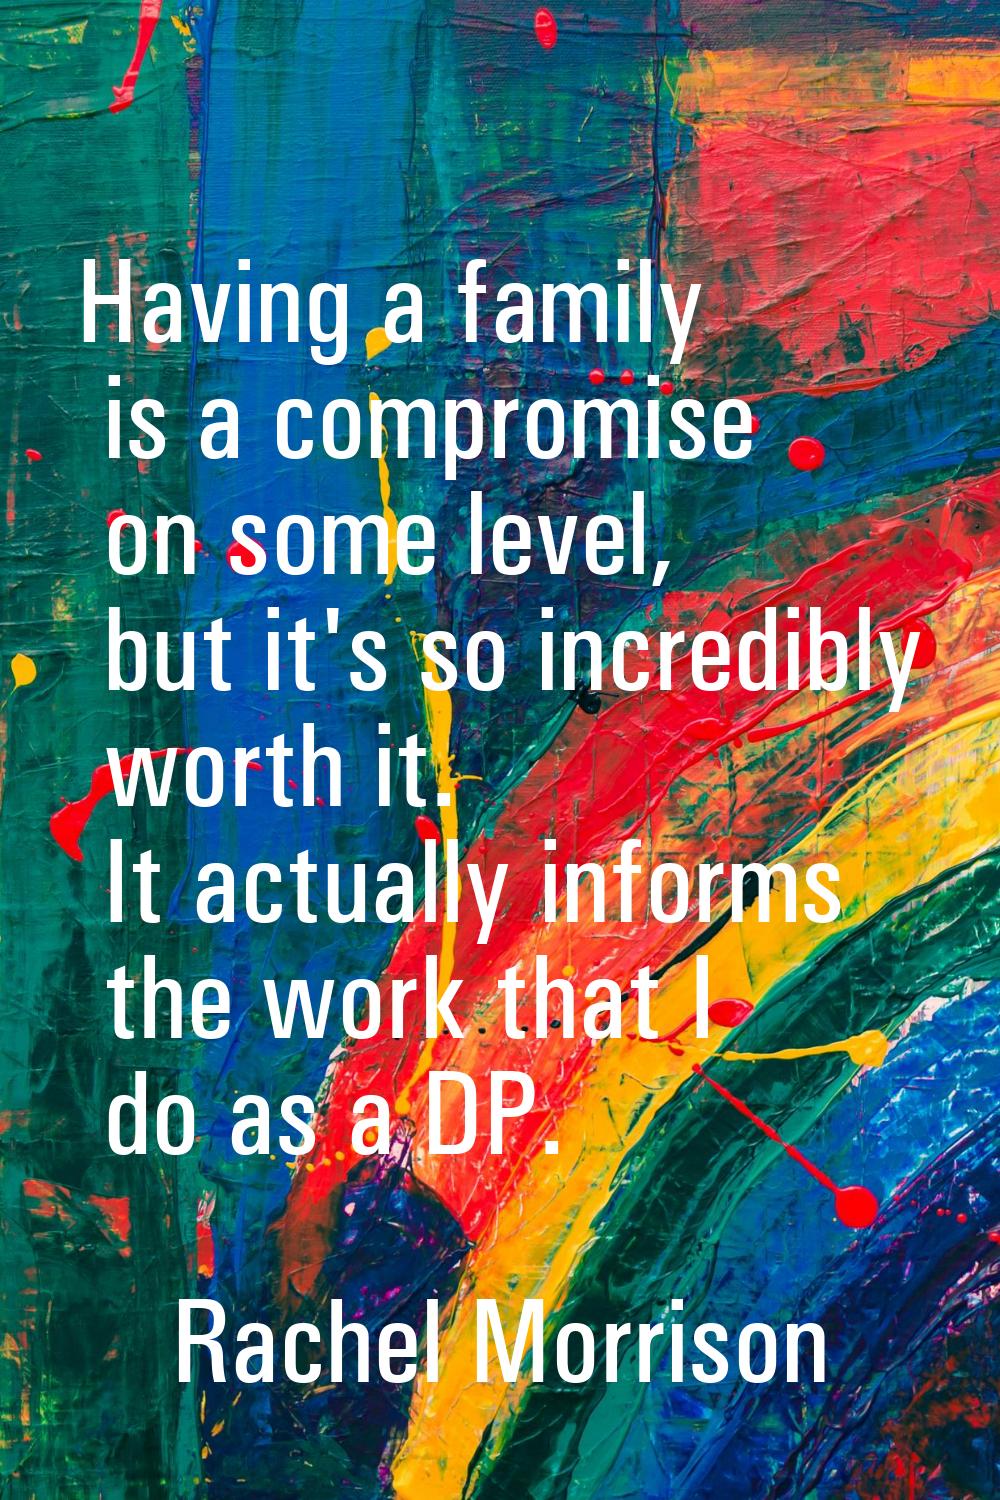 Having a family is a compromise on some level, but it's so incredibly worth it. It actually informs